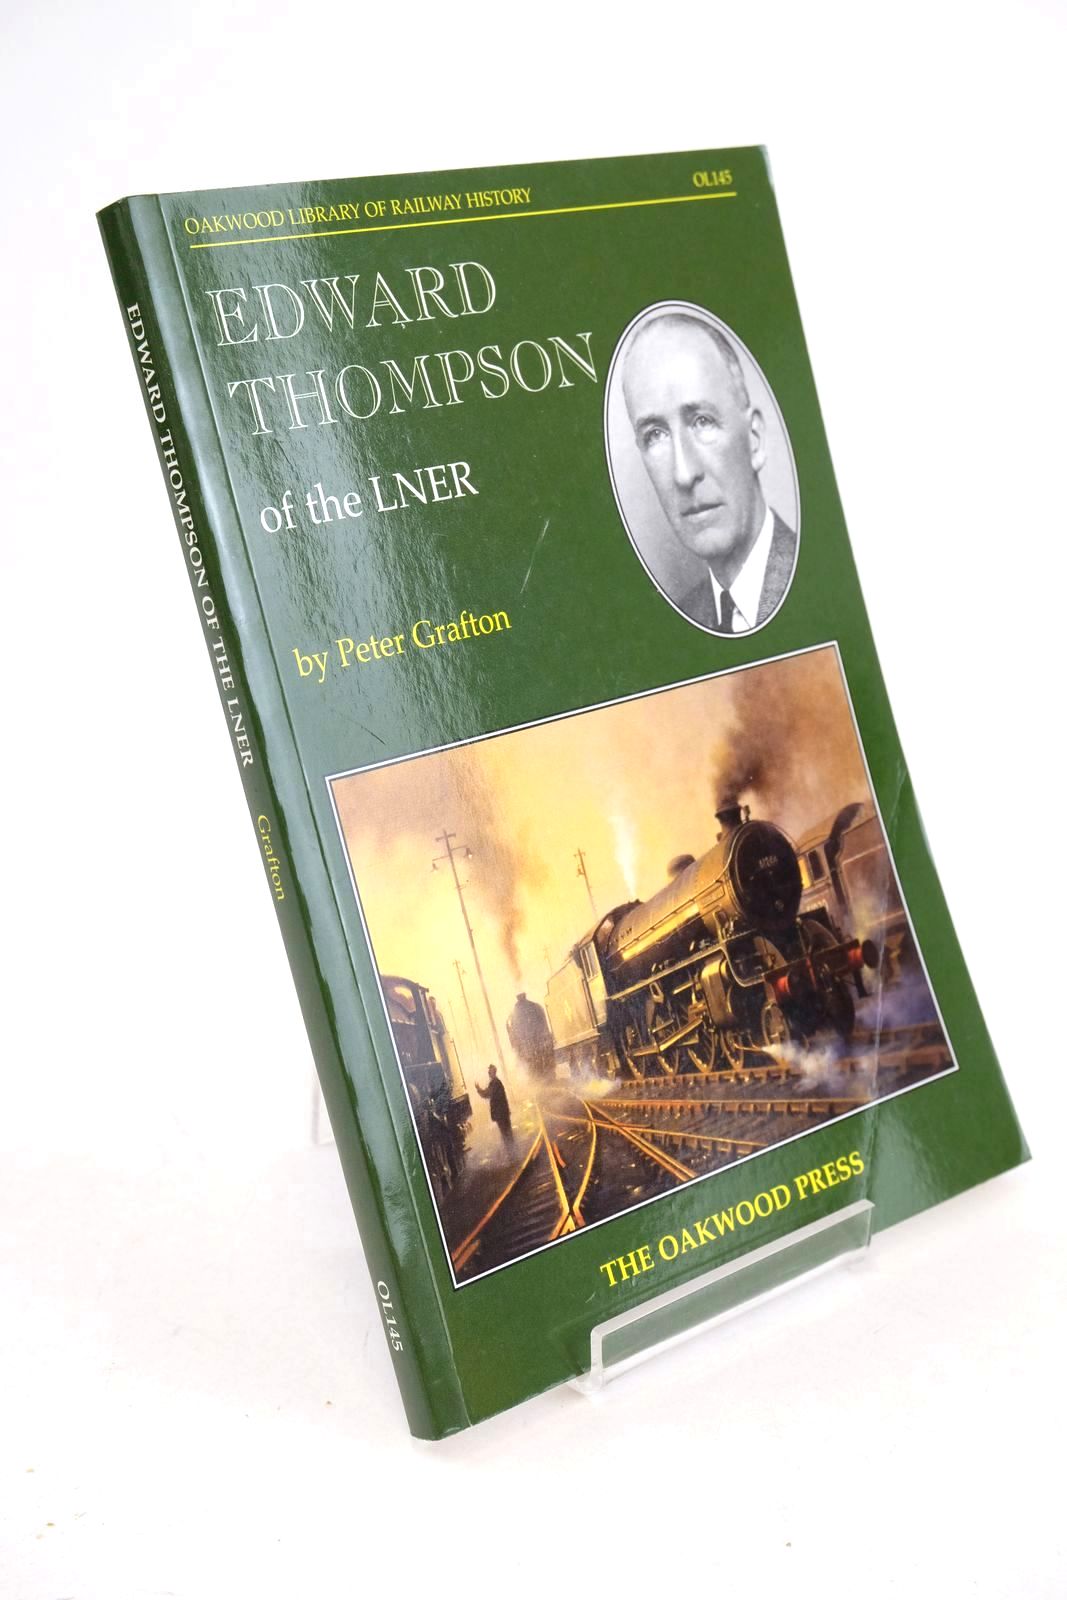 Photo of EDWARD THOMPSON OF THE LNER written by Grafton, Peter published by The Oakwood Press (STOCK CODE: 1327060)  for sale by Stella & Rose's Books